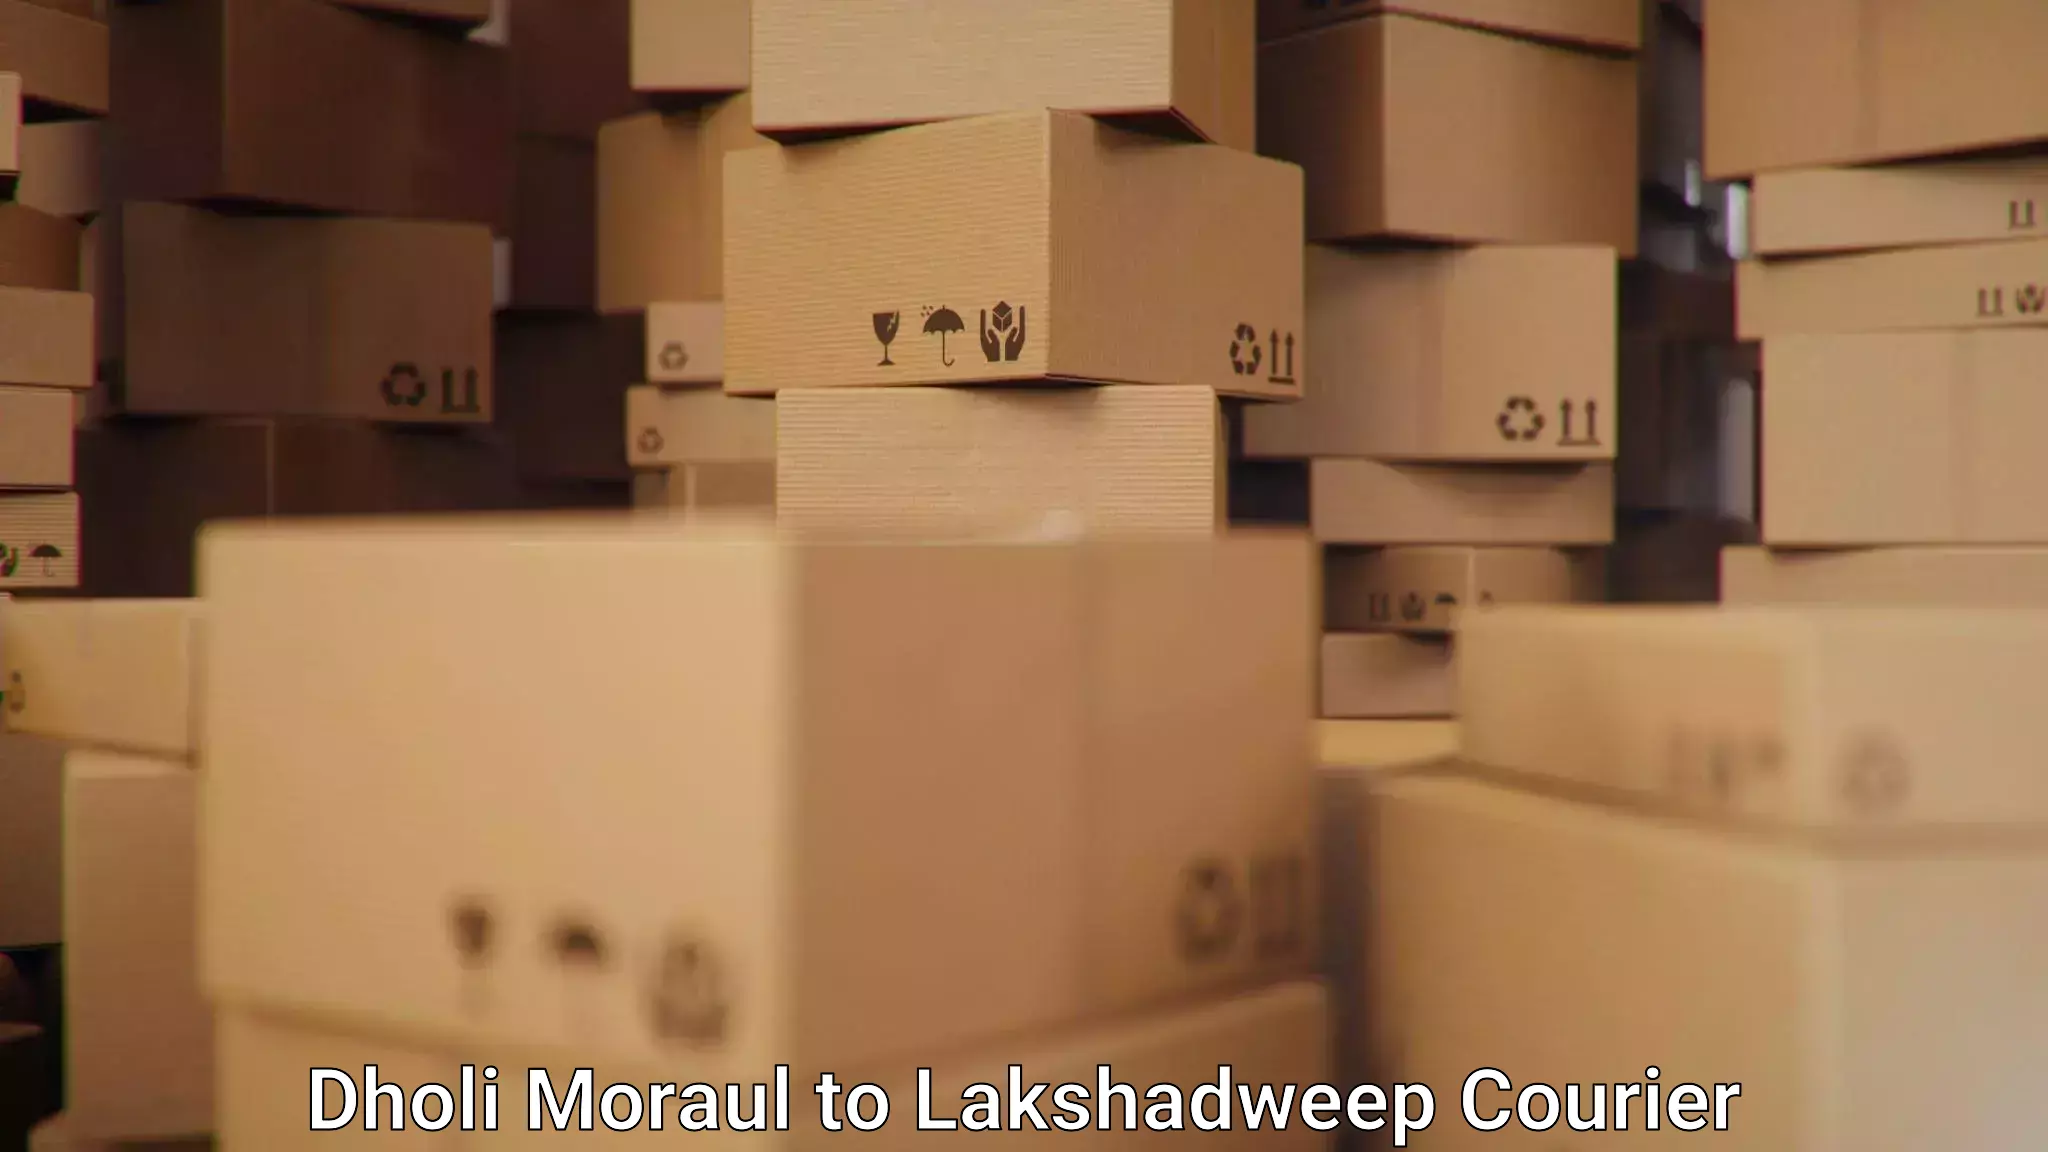 Expedited shipping solutions Dholi Moraul to Lakshadweep